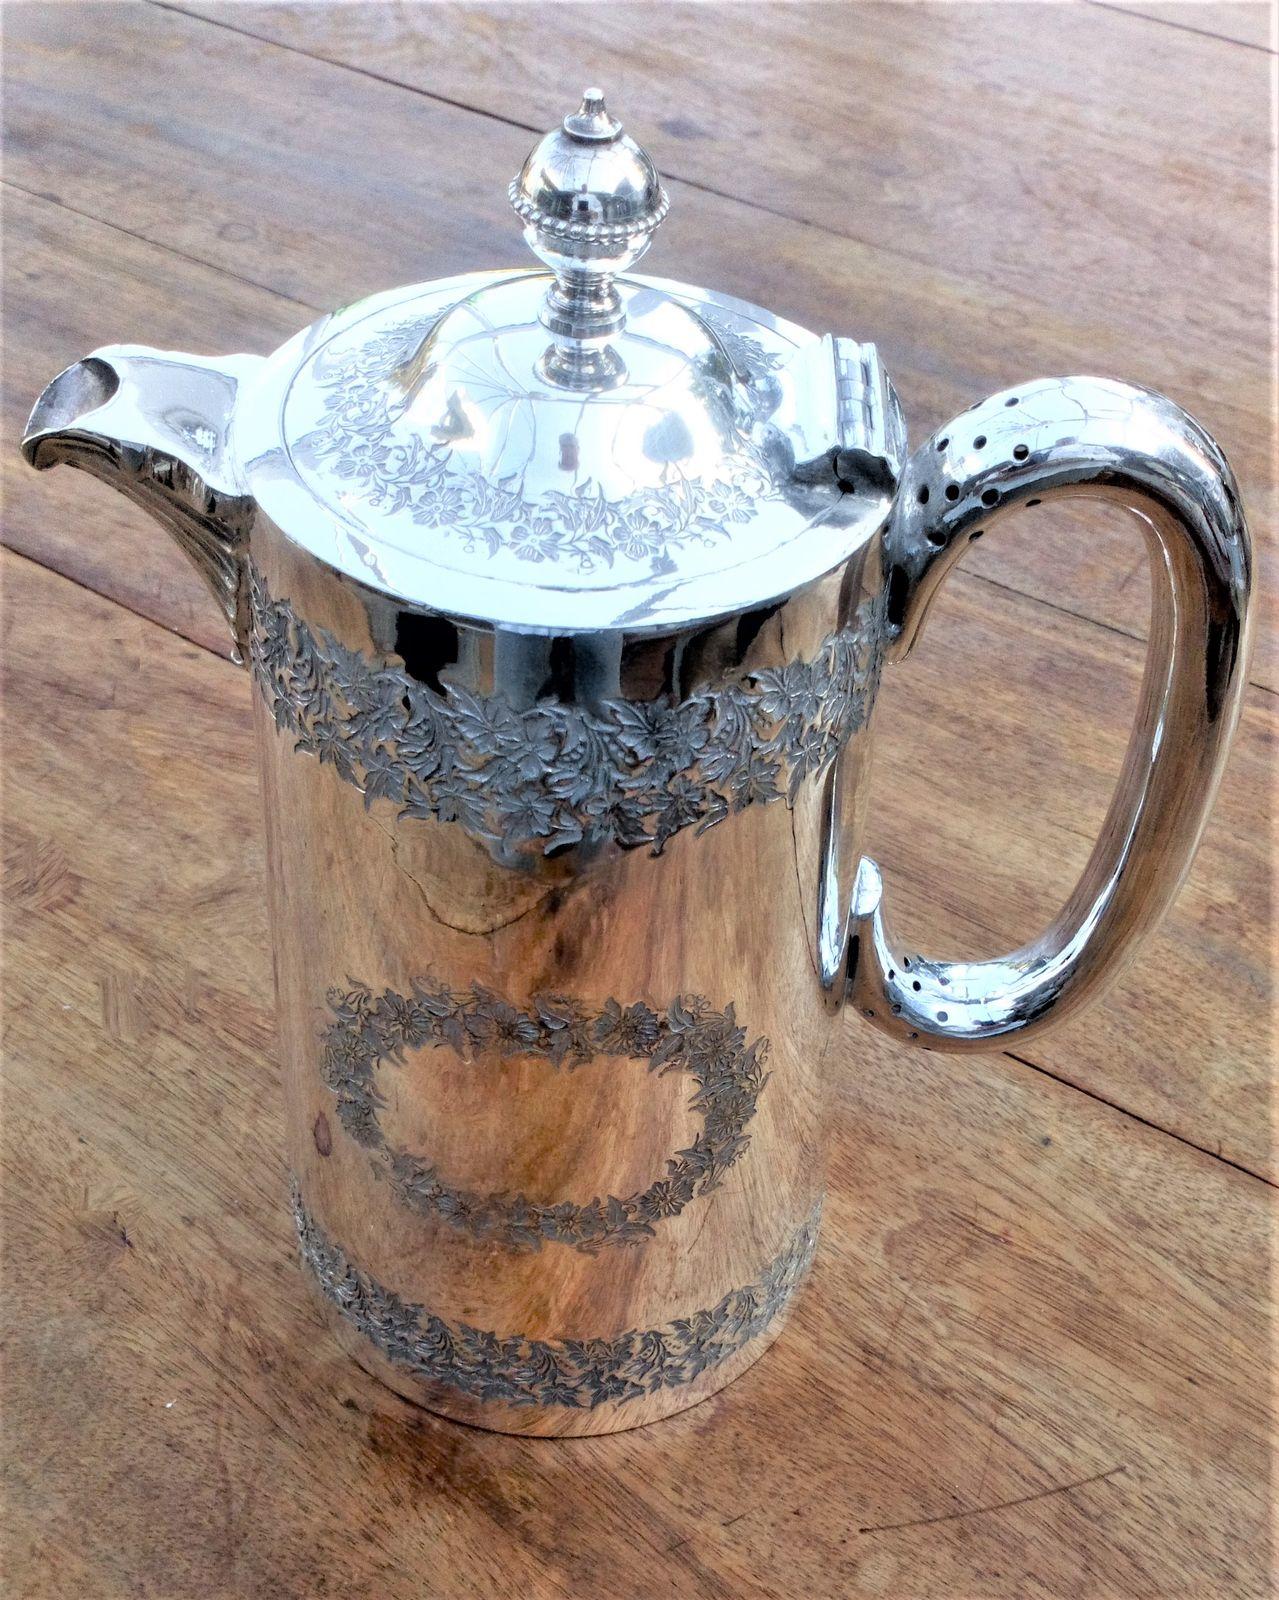 An antique Walker and Hall Victorian silver plated hot water jug or coffee pot engraved tapered cylindrical body innovative handle patent number 19759 cica 1900